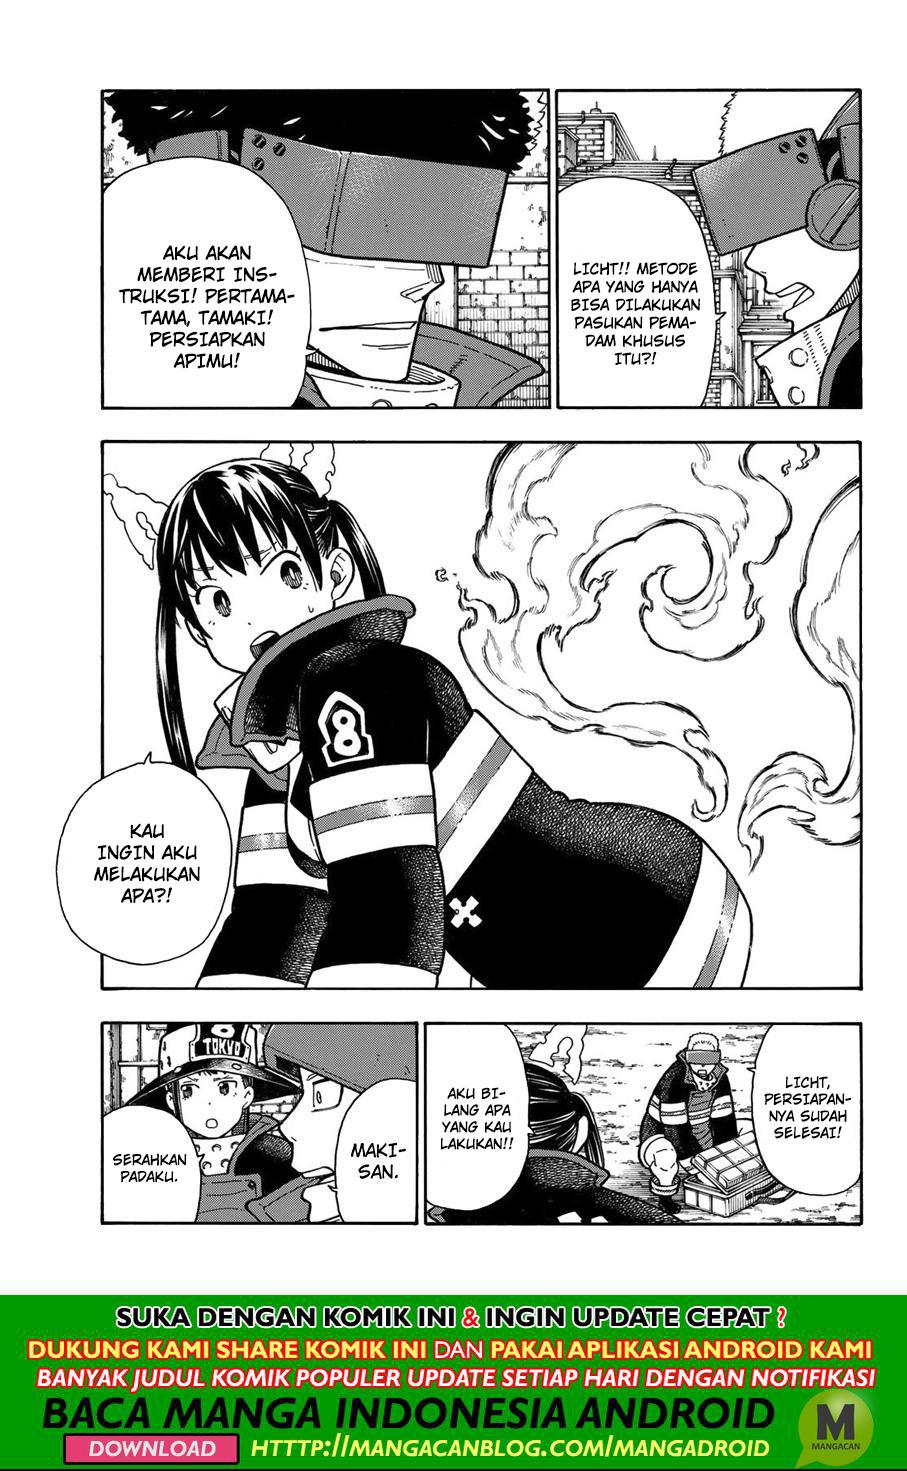 Fire Brigade of Flames Chapter 185